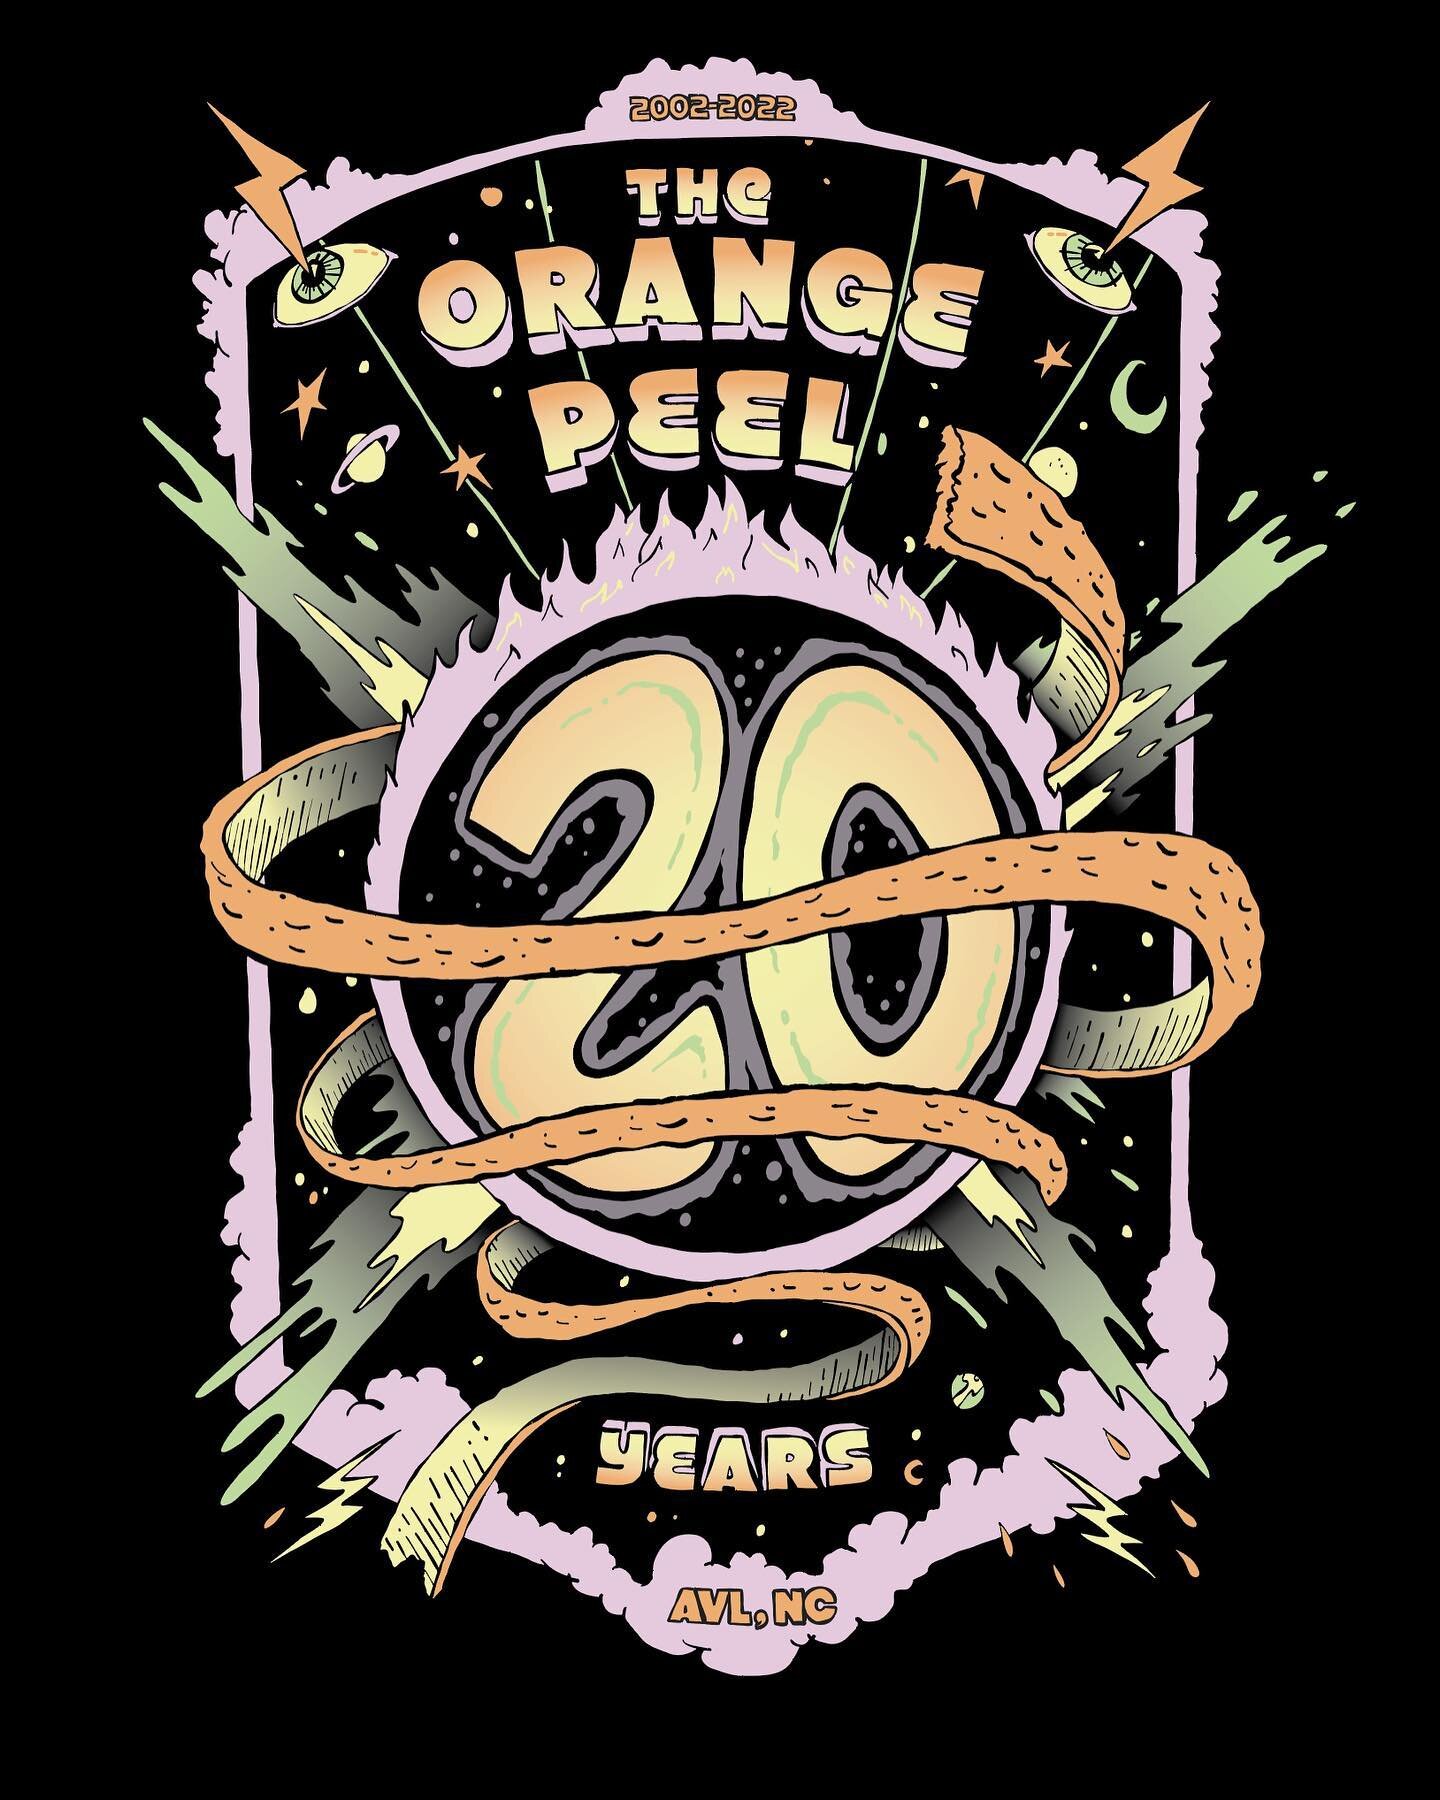 We are proud to have designed and printed @the_orange_peel for their 20th anniversary! It was a great weekend and here&rsquo;s to many more .
.
.
#tshirt #screenprinting  #graphicdesign #tshirt #illustration #designer